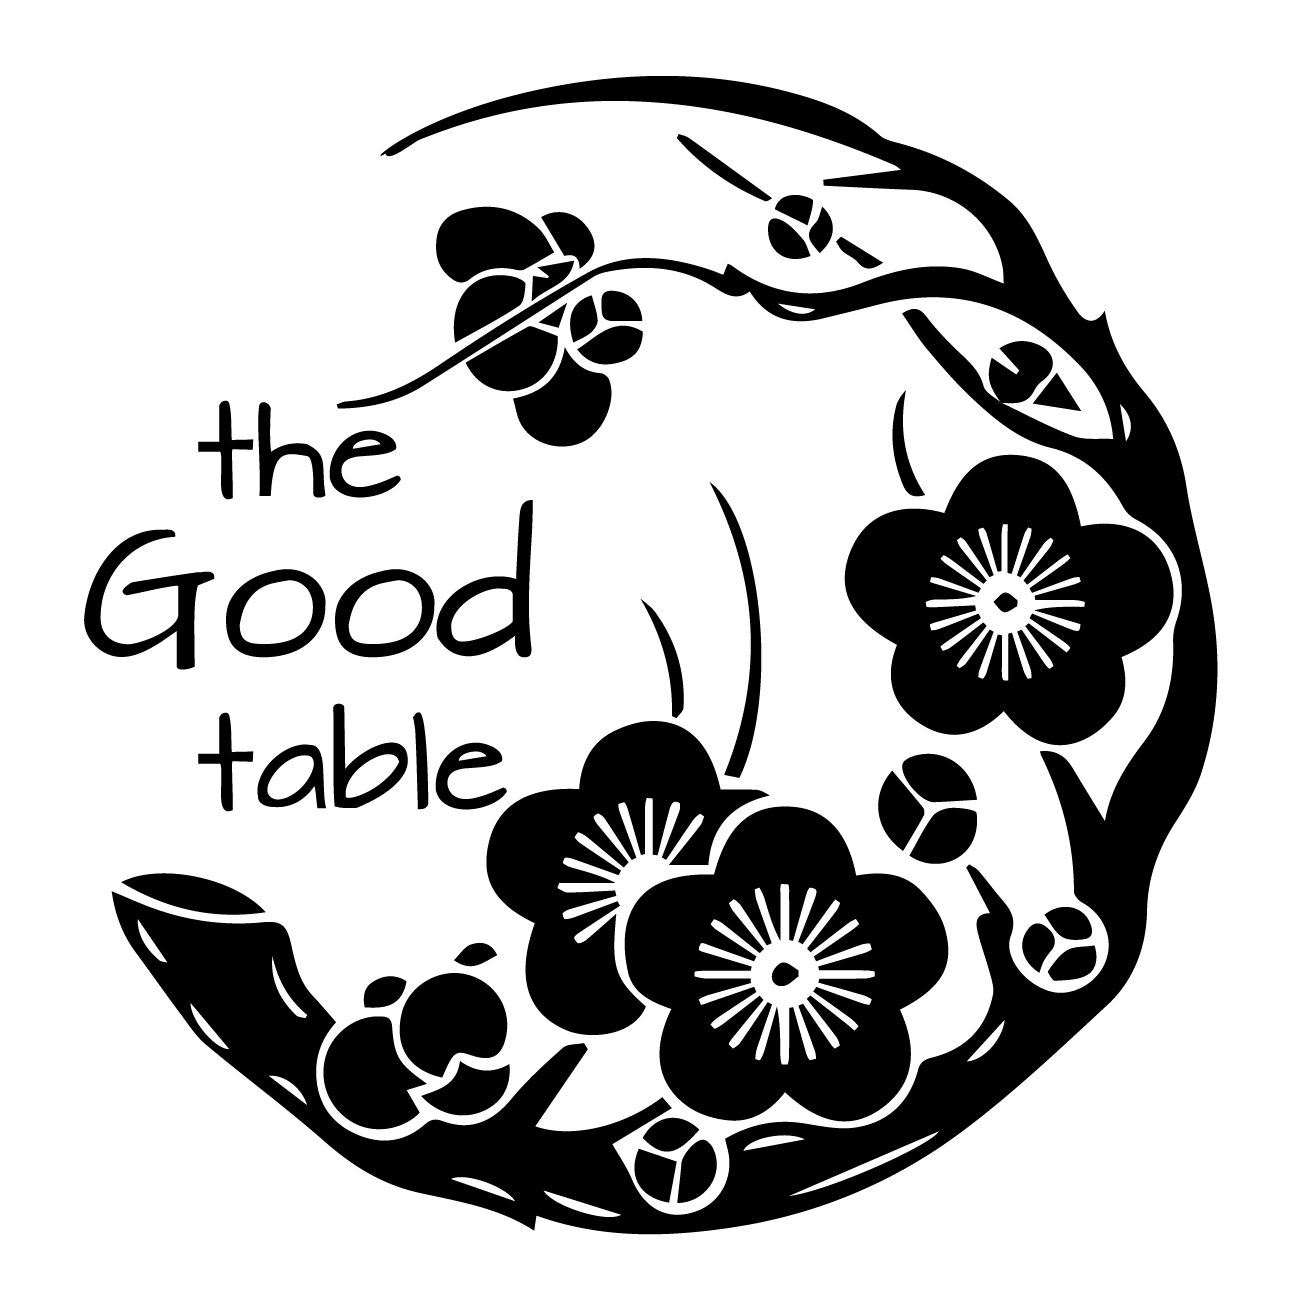 The Good Table United Church of Christ